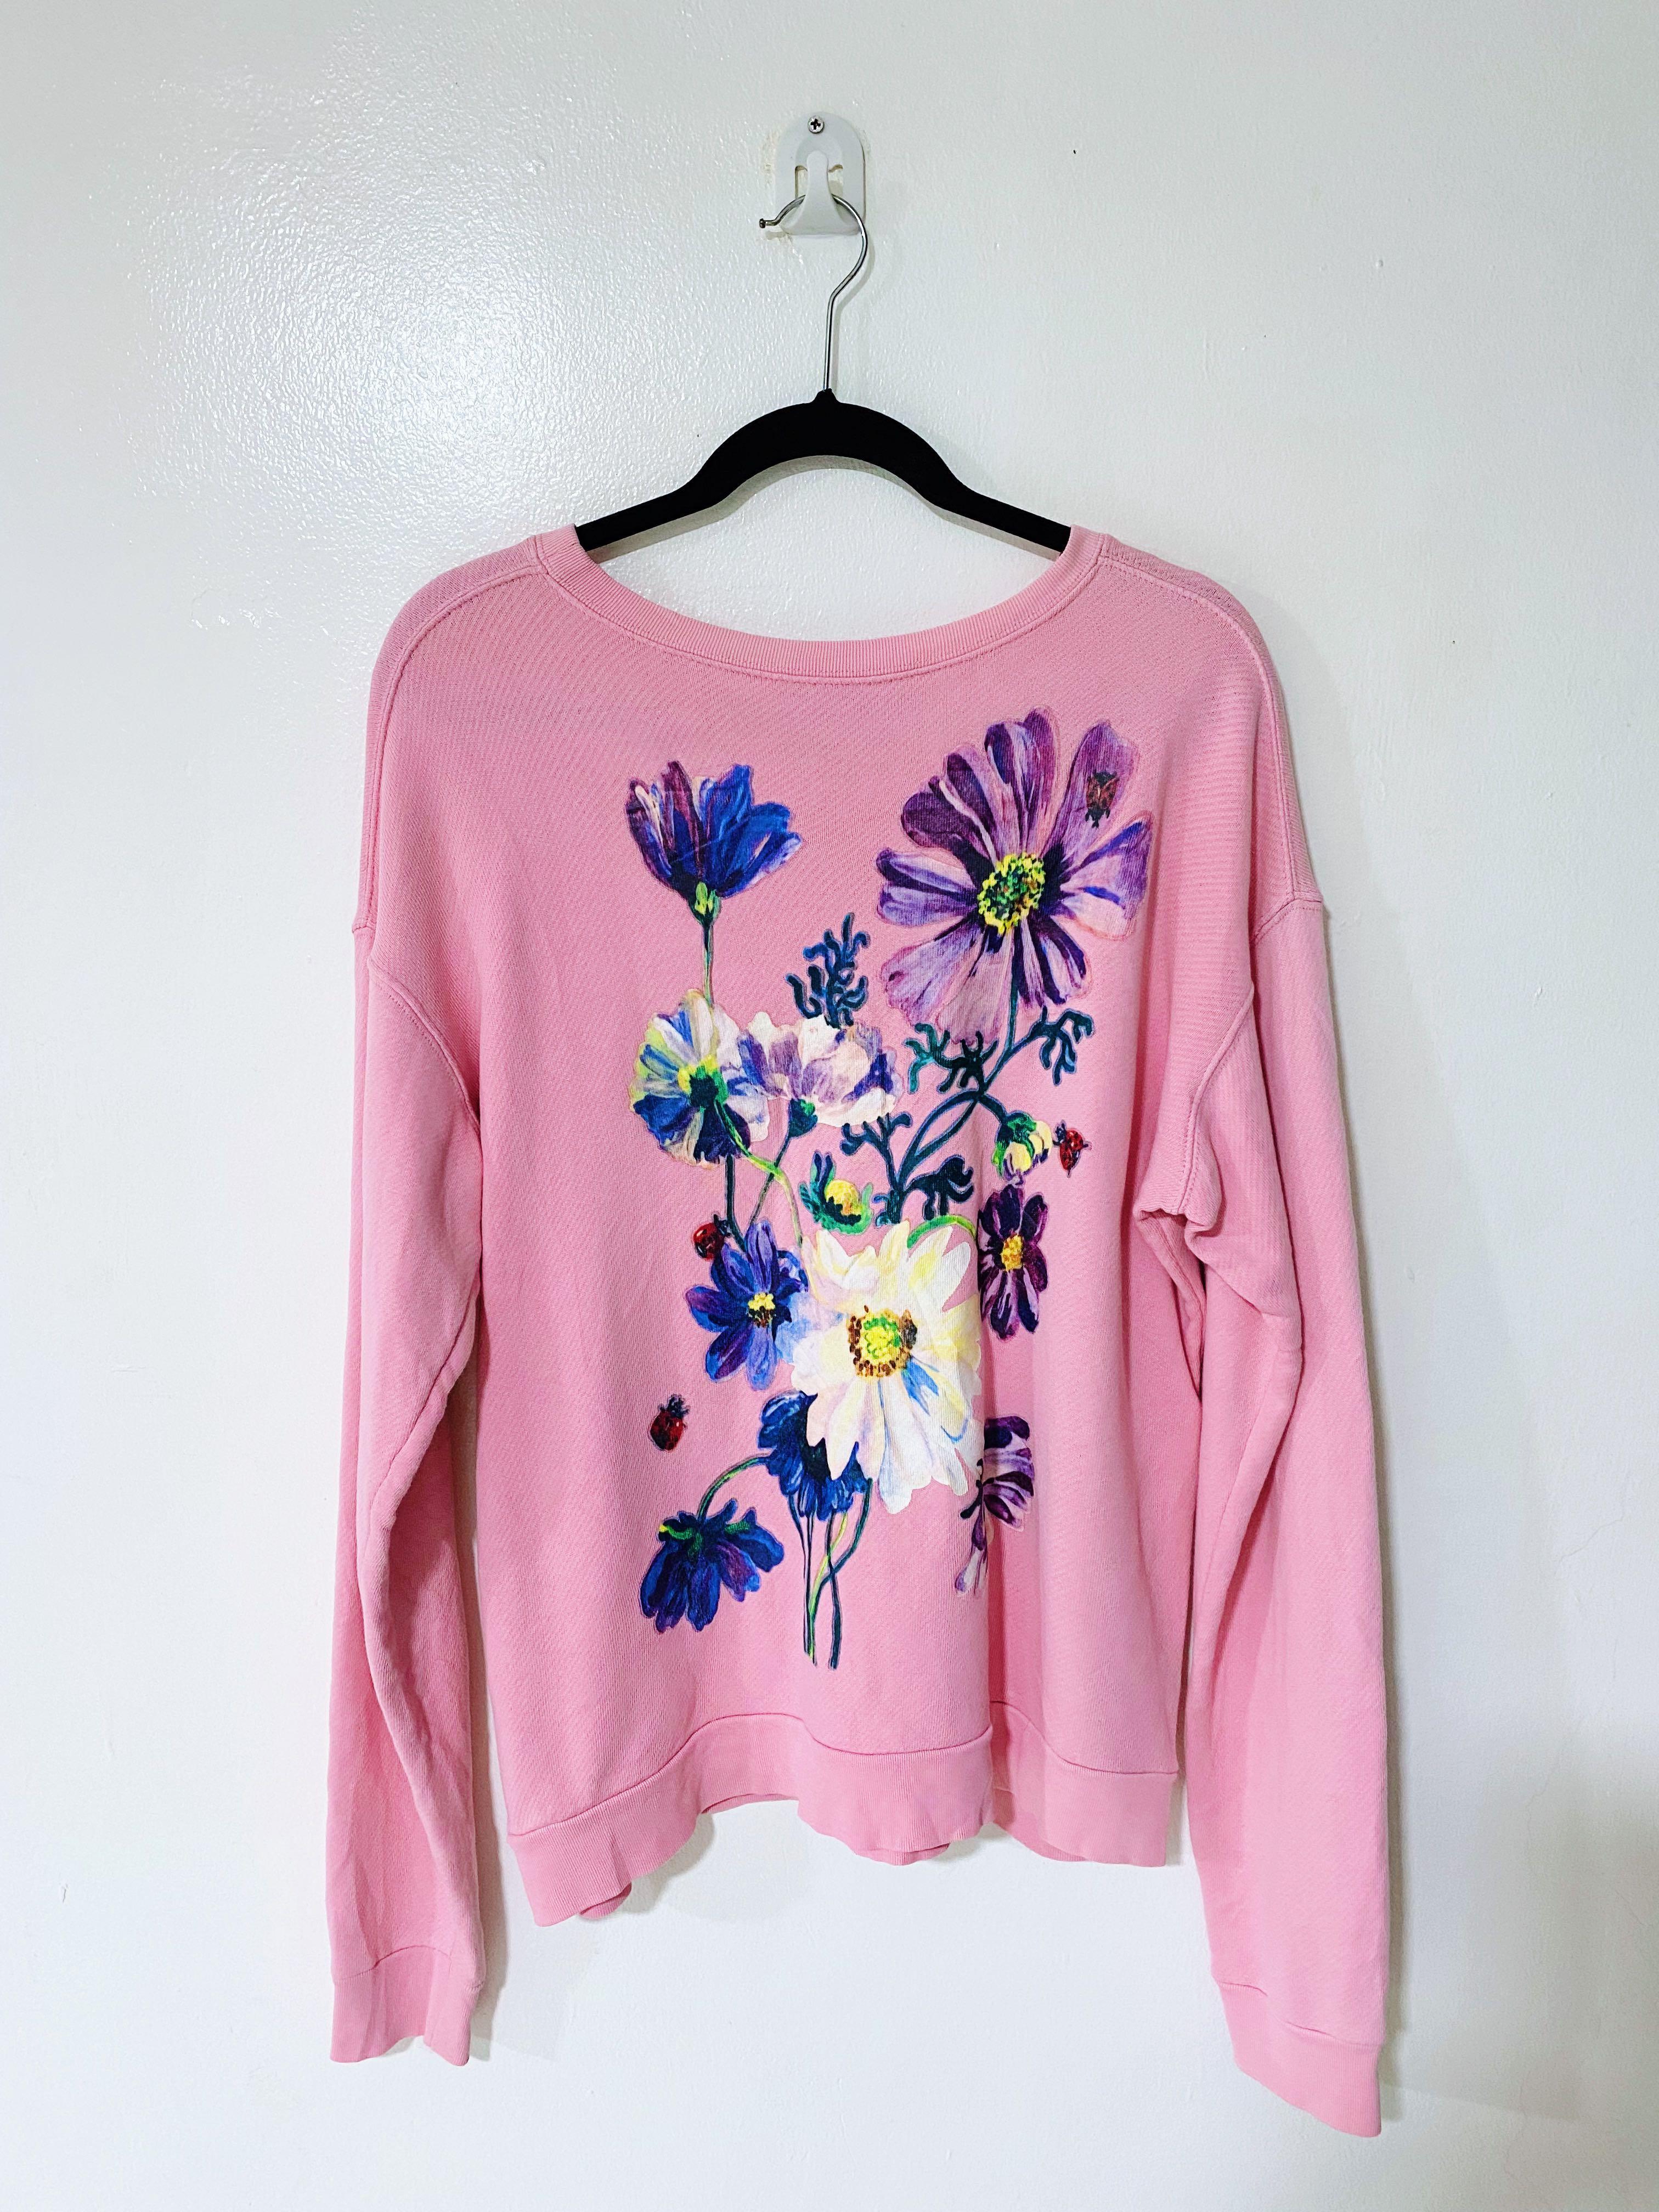 New Gucci Limited Edition Bambi Fawn and Flowers Sweater at